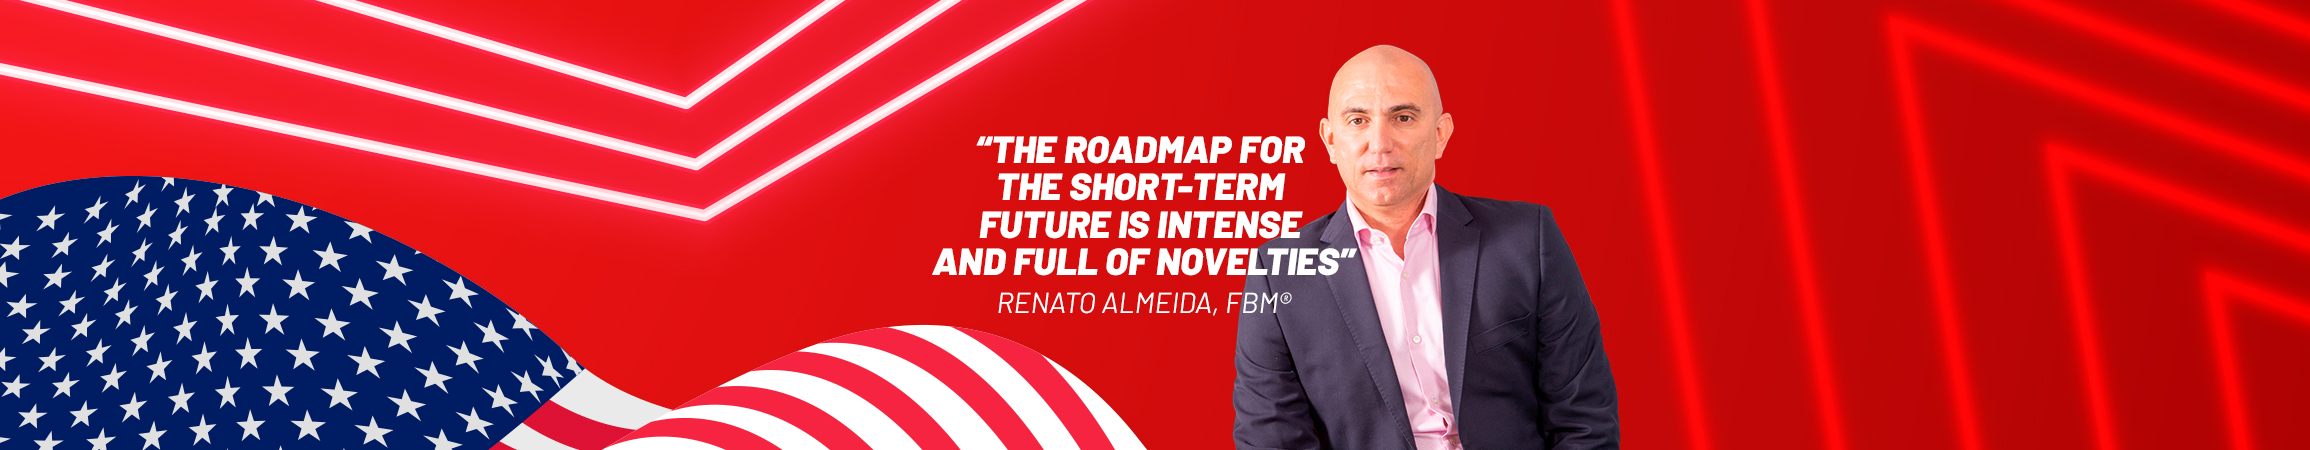 Renato Almeida: “The roadmap for the short-term future is intense and full of novelties”